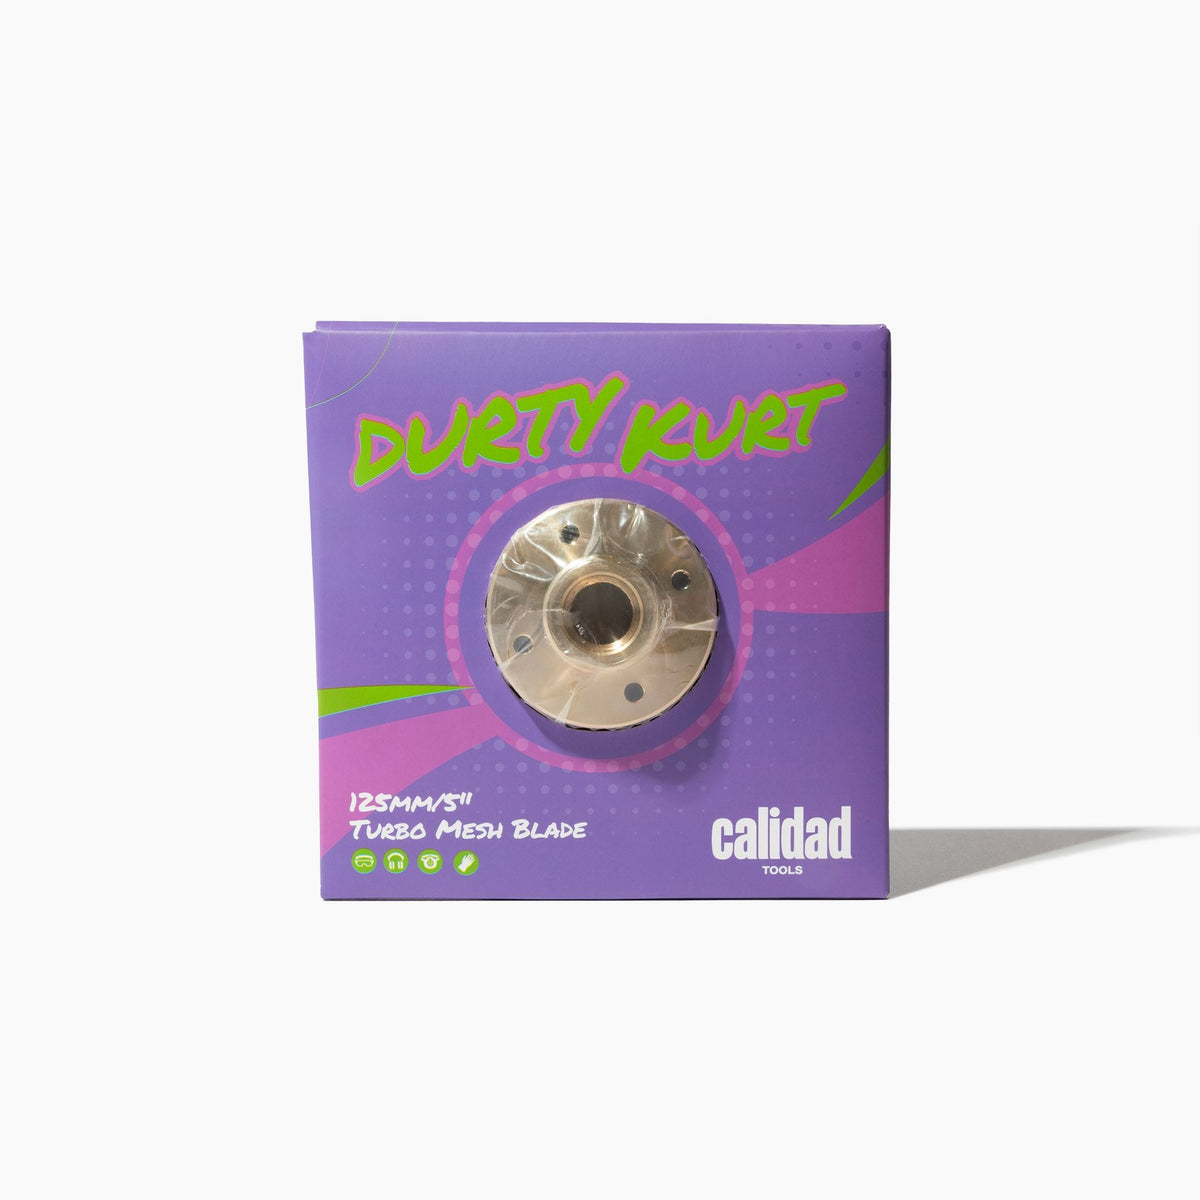 125mm Turbo Mesh Blade &quot;Durty Kurt&quot; by Calidad Tools